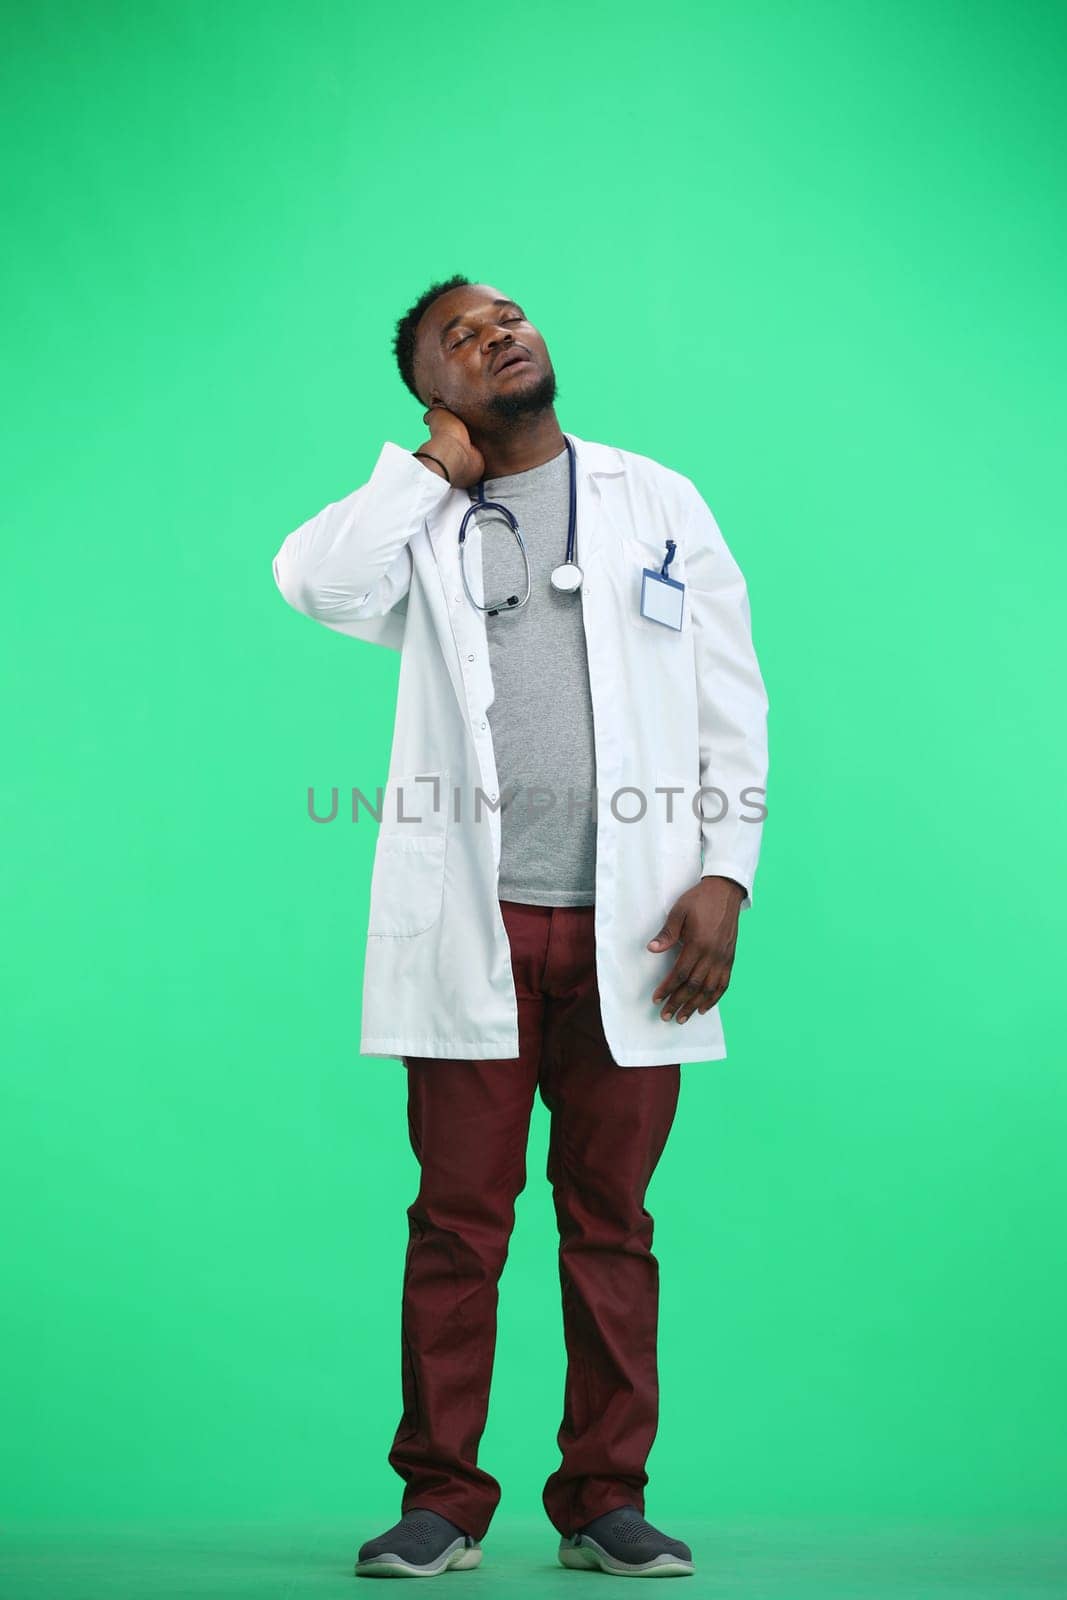 The doctor, in full height, on a green background, tired by Prosto